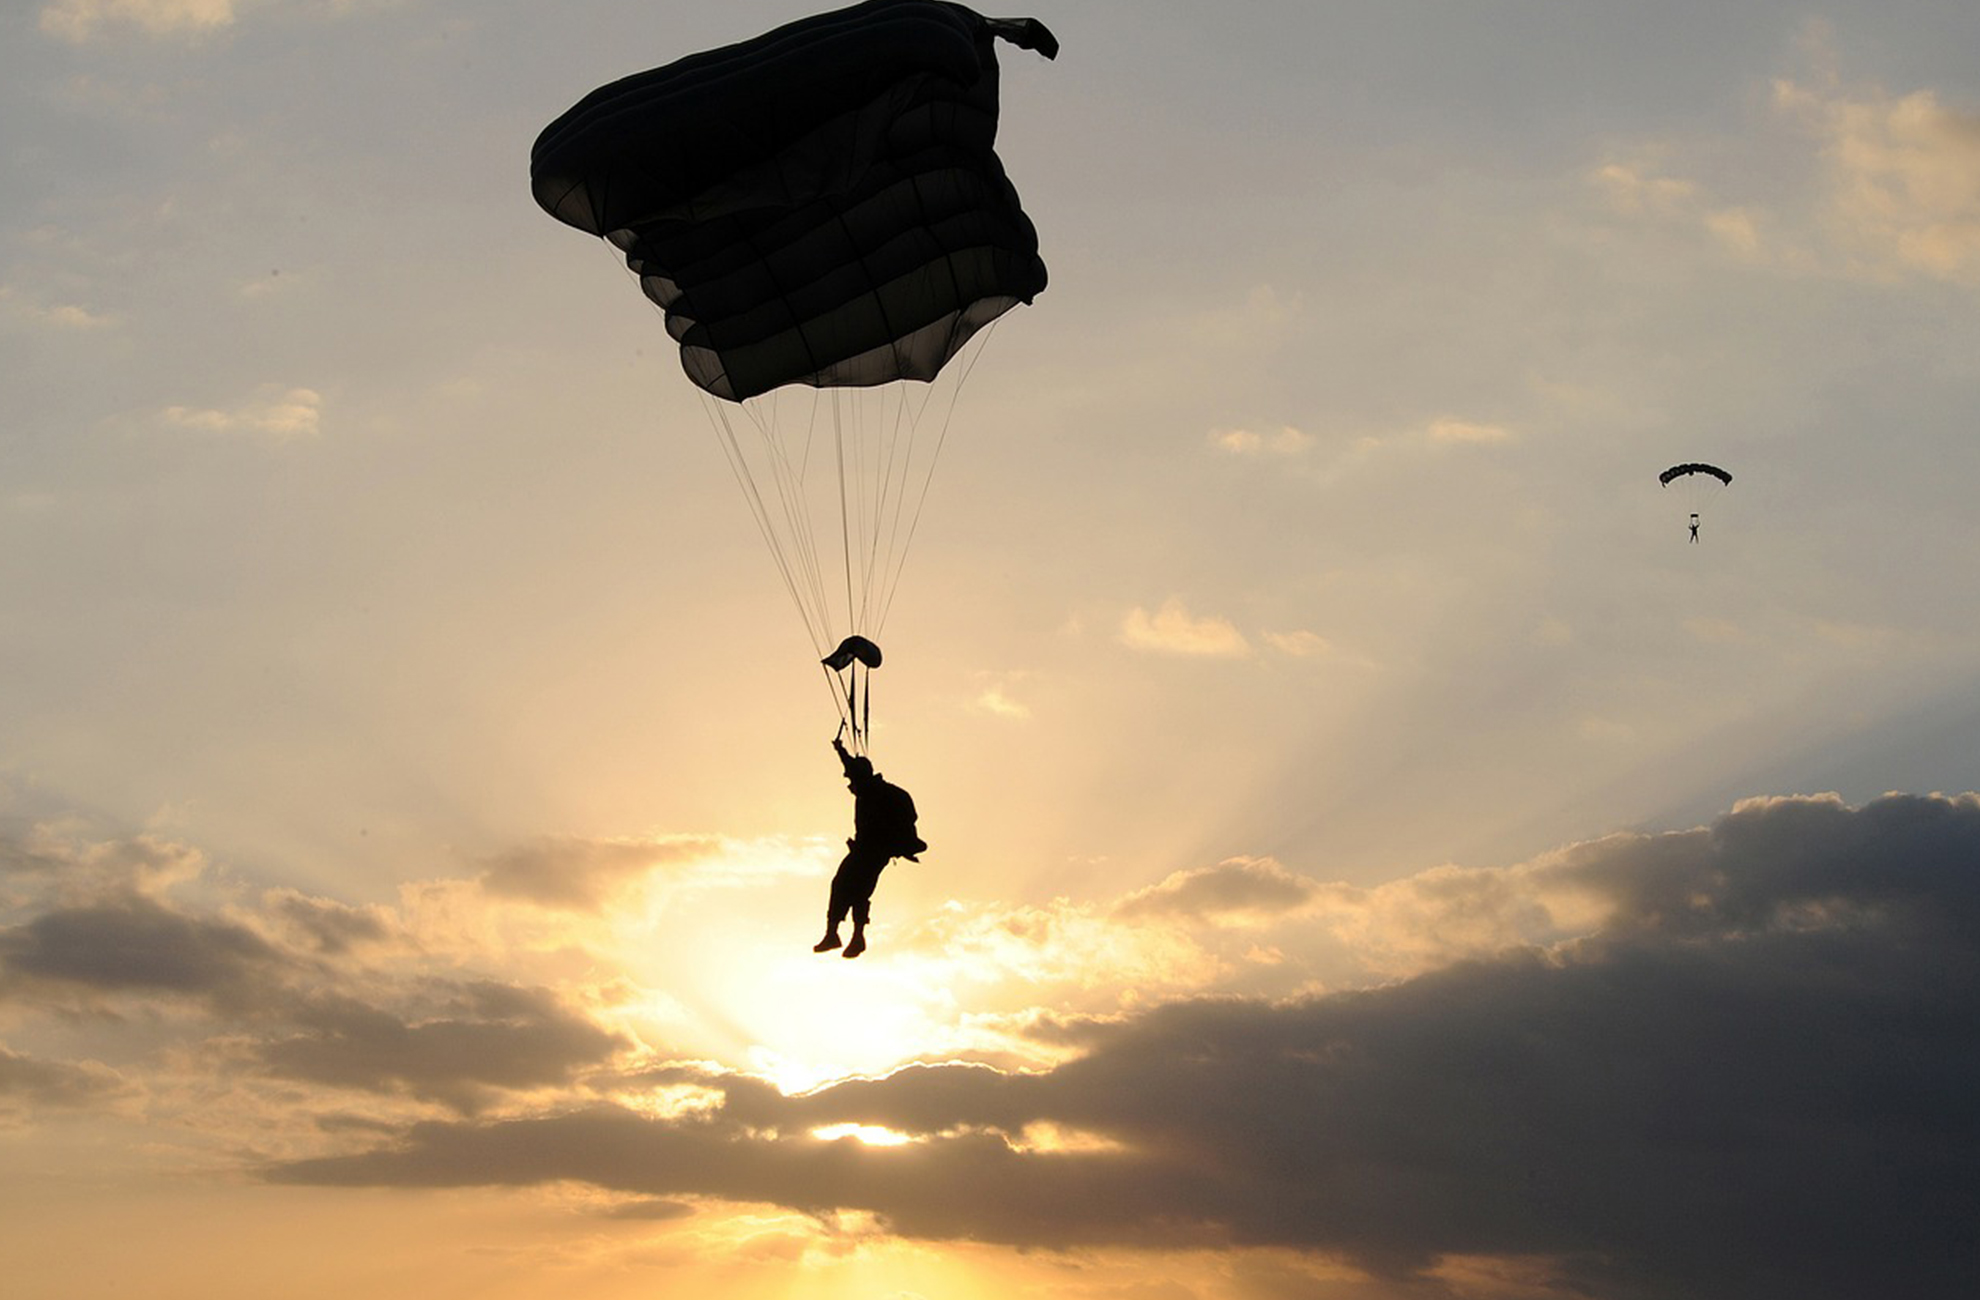 Skydivers get an adrenaline rush by skydiving at sunset